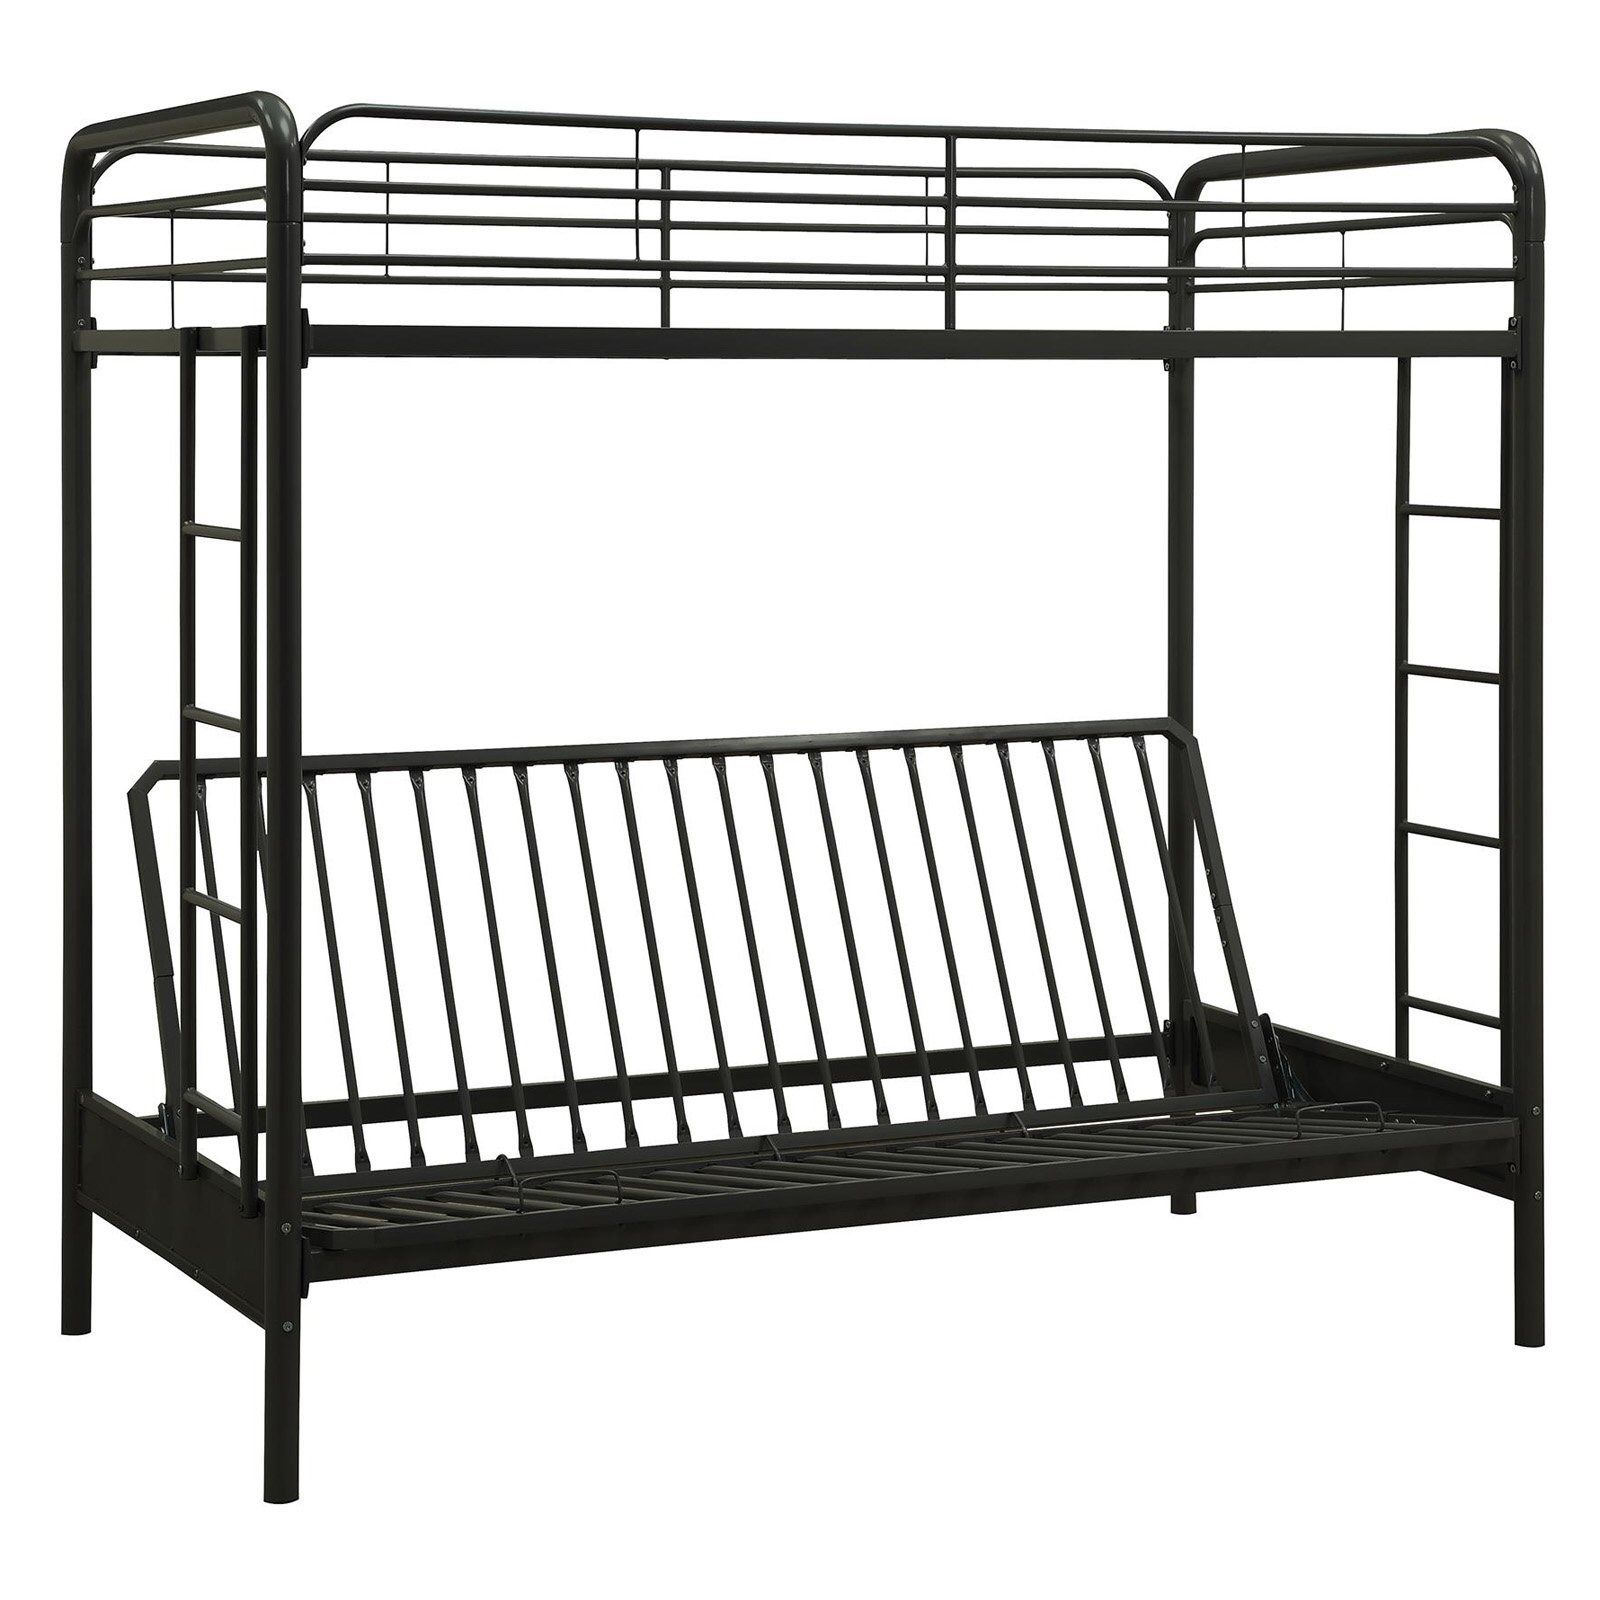 New DHP Twin Over Futon Metal Bunk Bed,Black Description:uton quickly, easily and safely converts into a full-size sleeper Conforms to the latest co